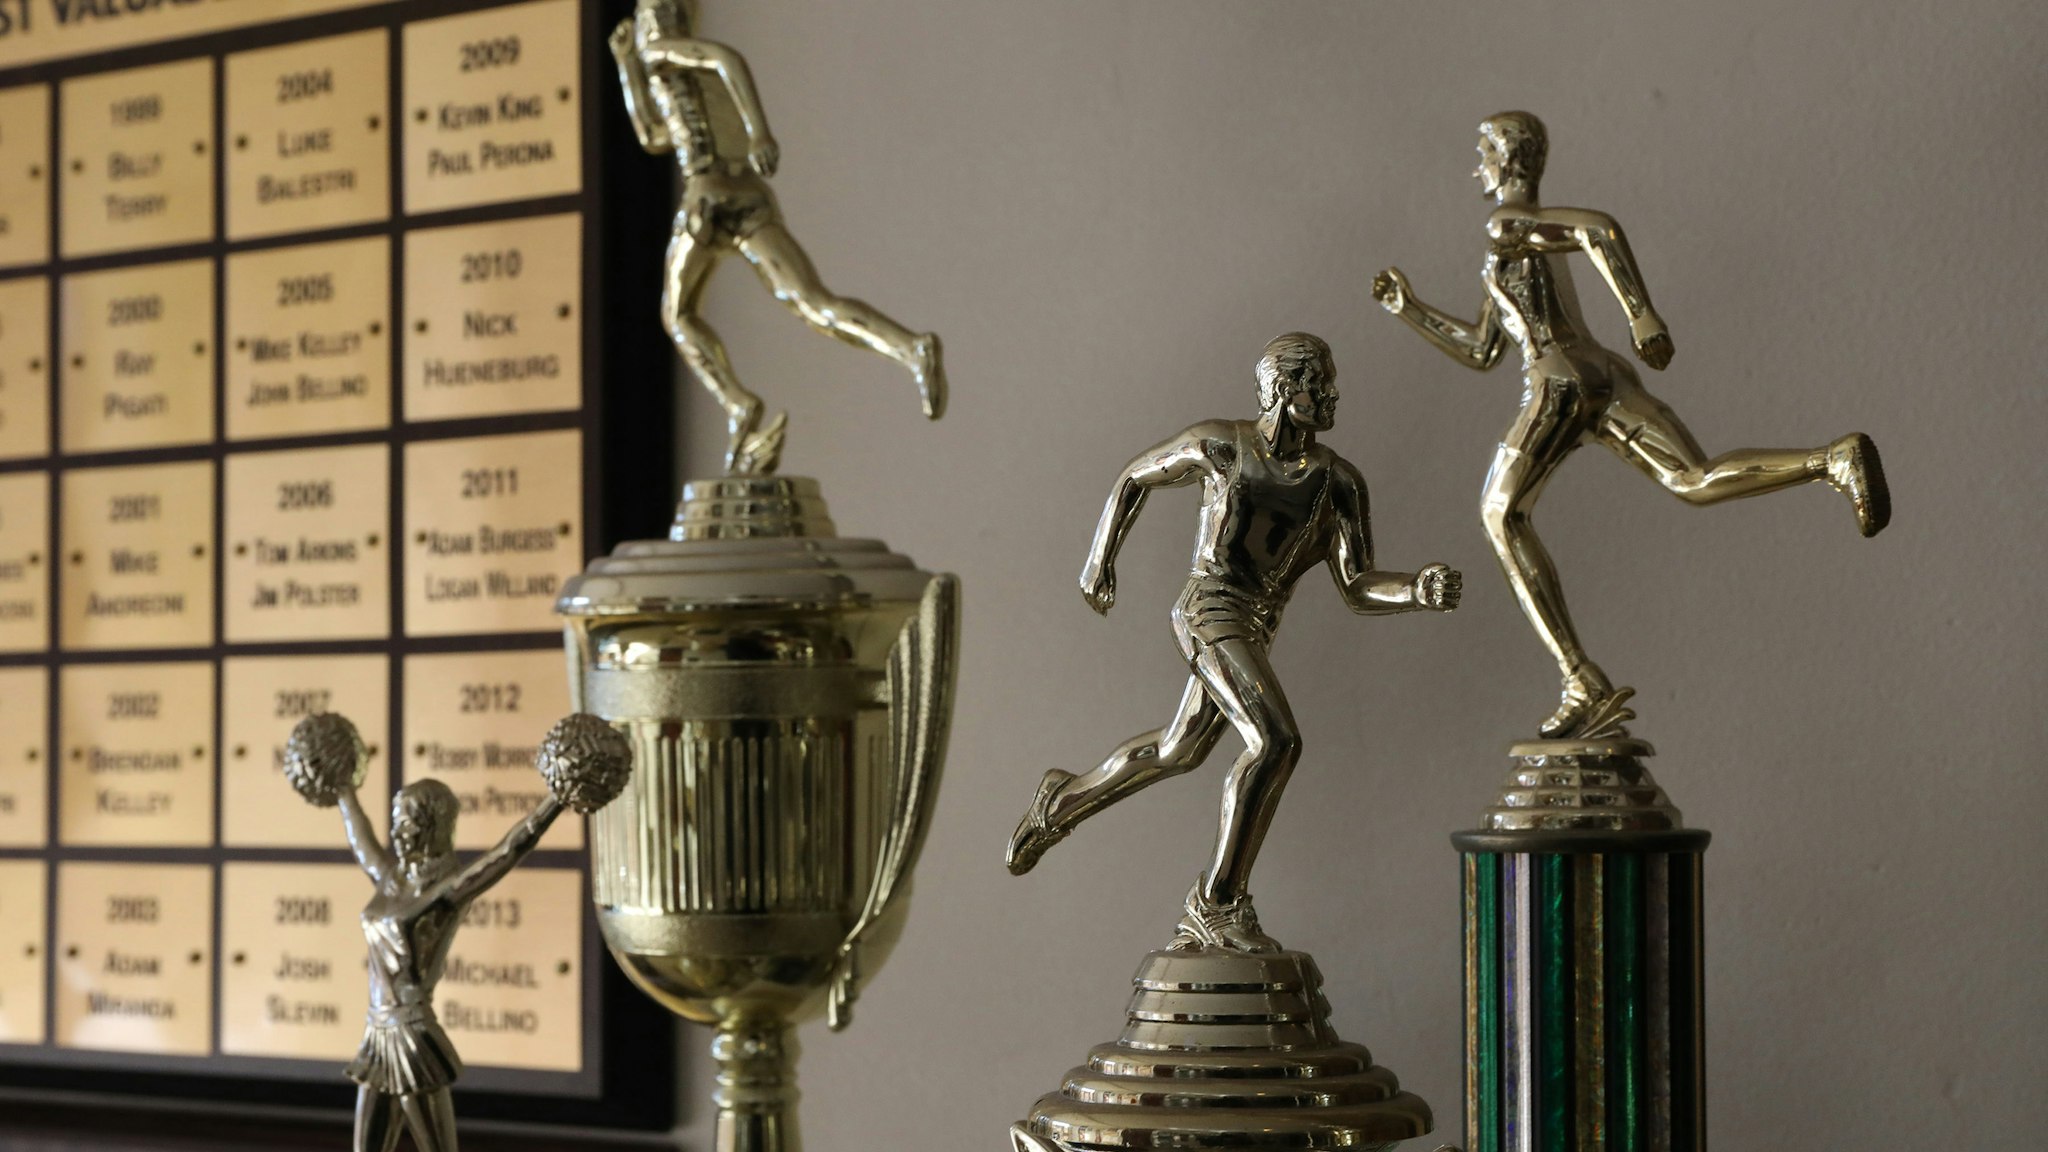 Track and field trophies on display at St. Bede Academy in Peru, Ill., Monday, Nov. 21, 2016. (Antonio Perez/Chicago Tribune/Tribune News Service via Getty Images)